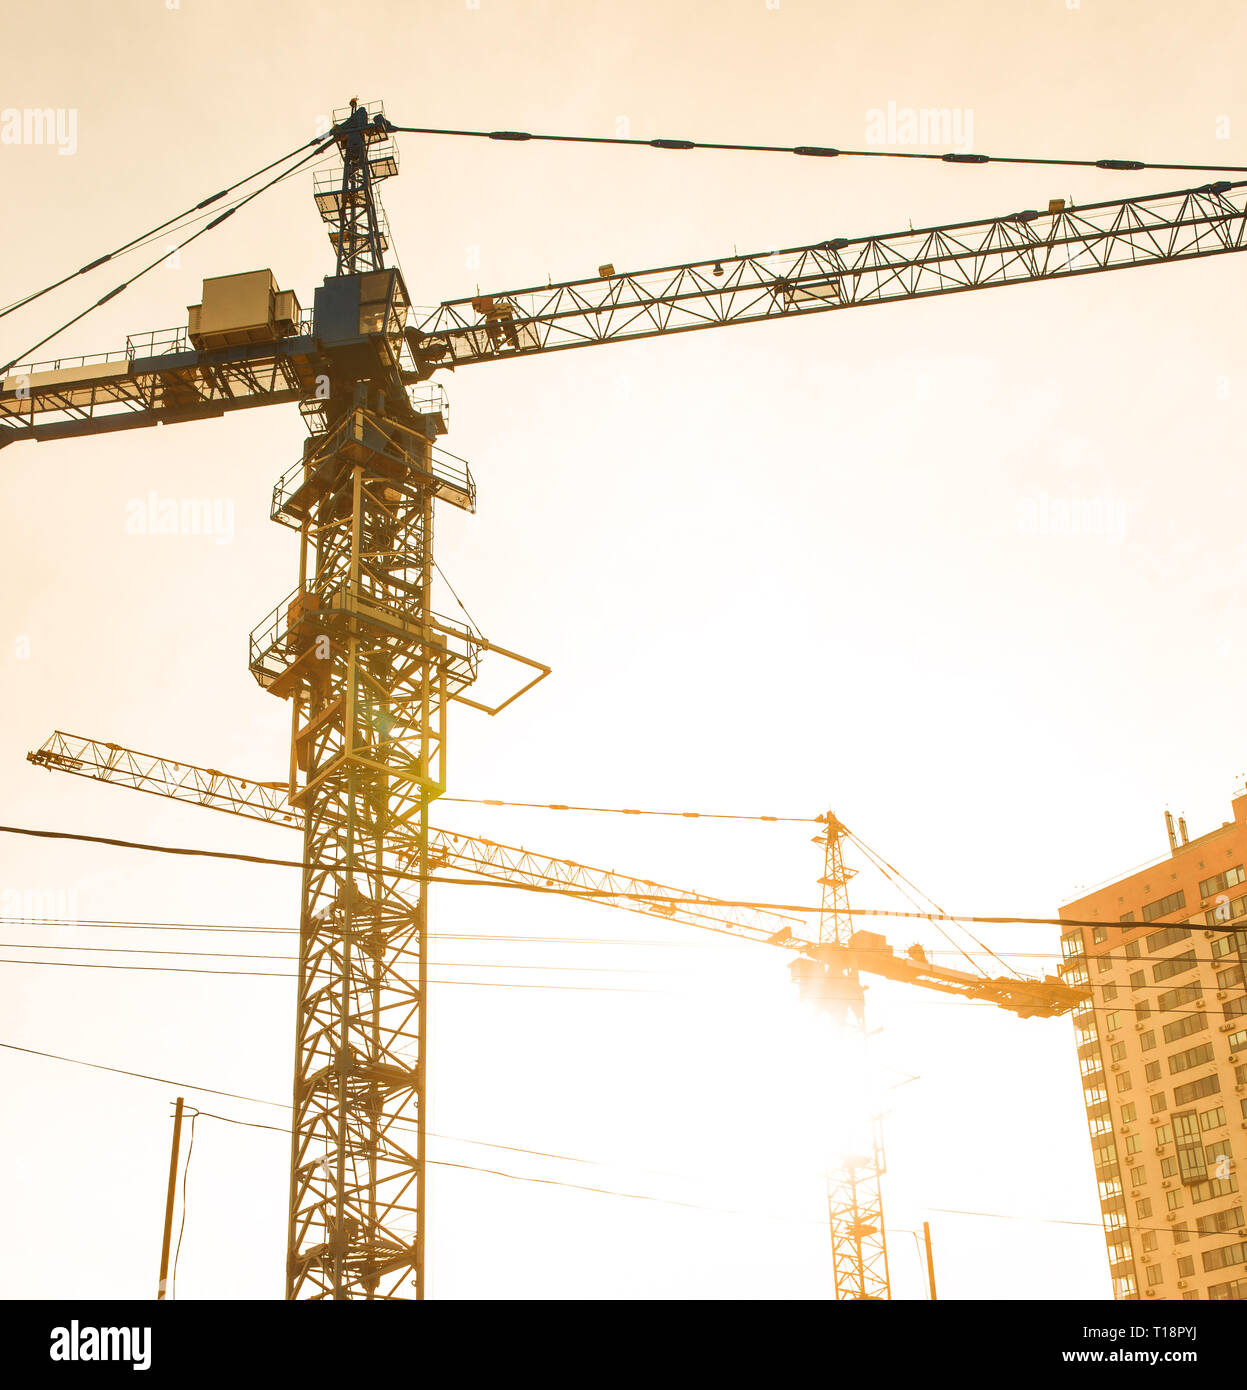 Building site with high-rise block under construction in an urban environment dominated by a large industrial crane silhouetted against sunset sky Stock Photo